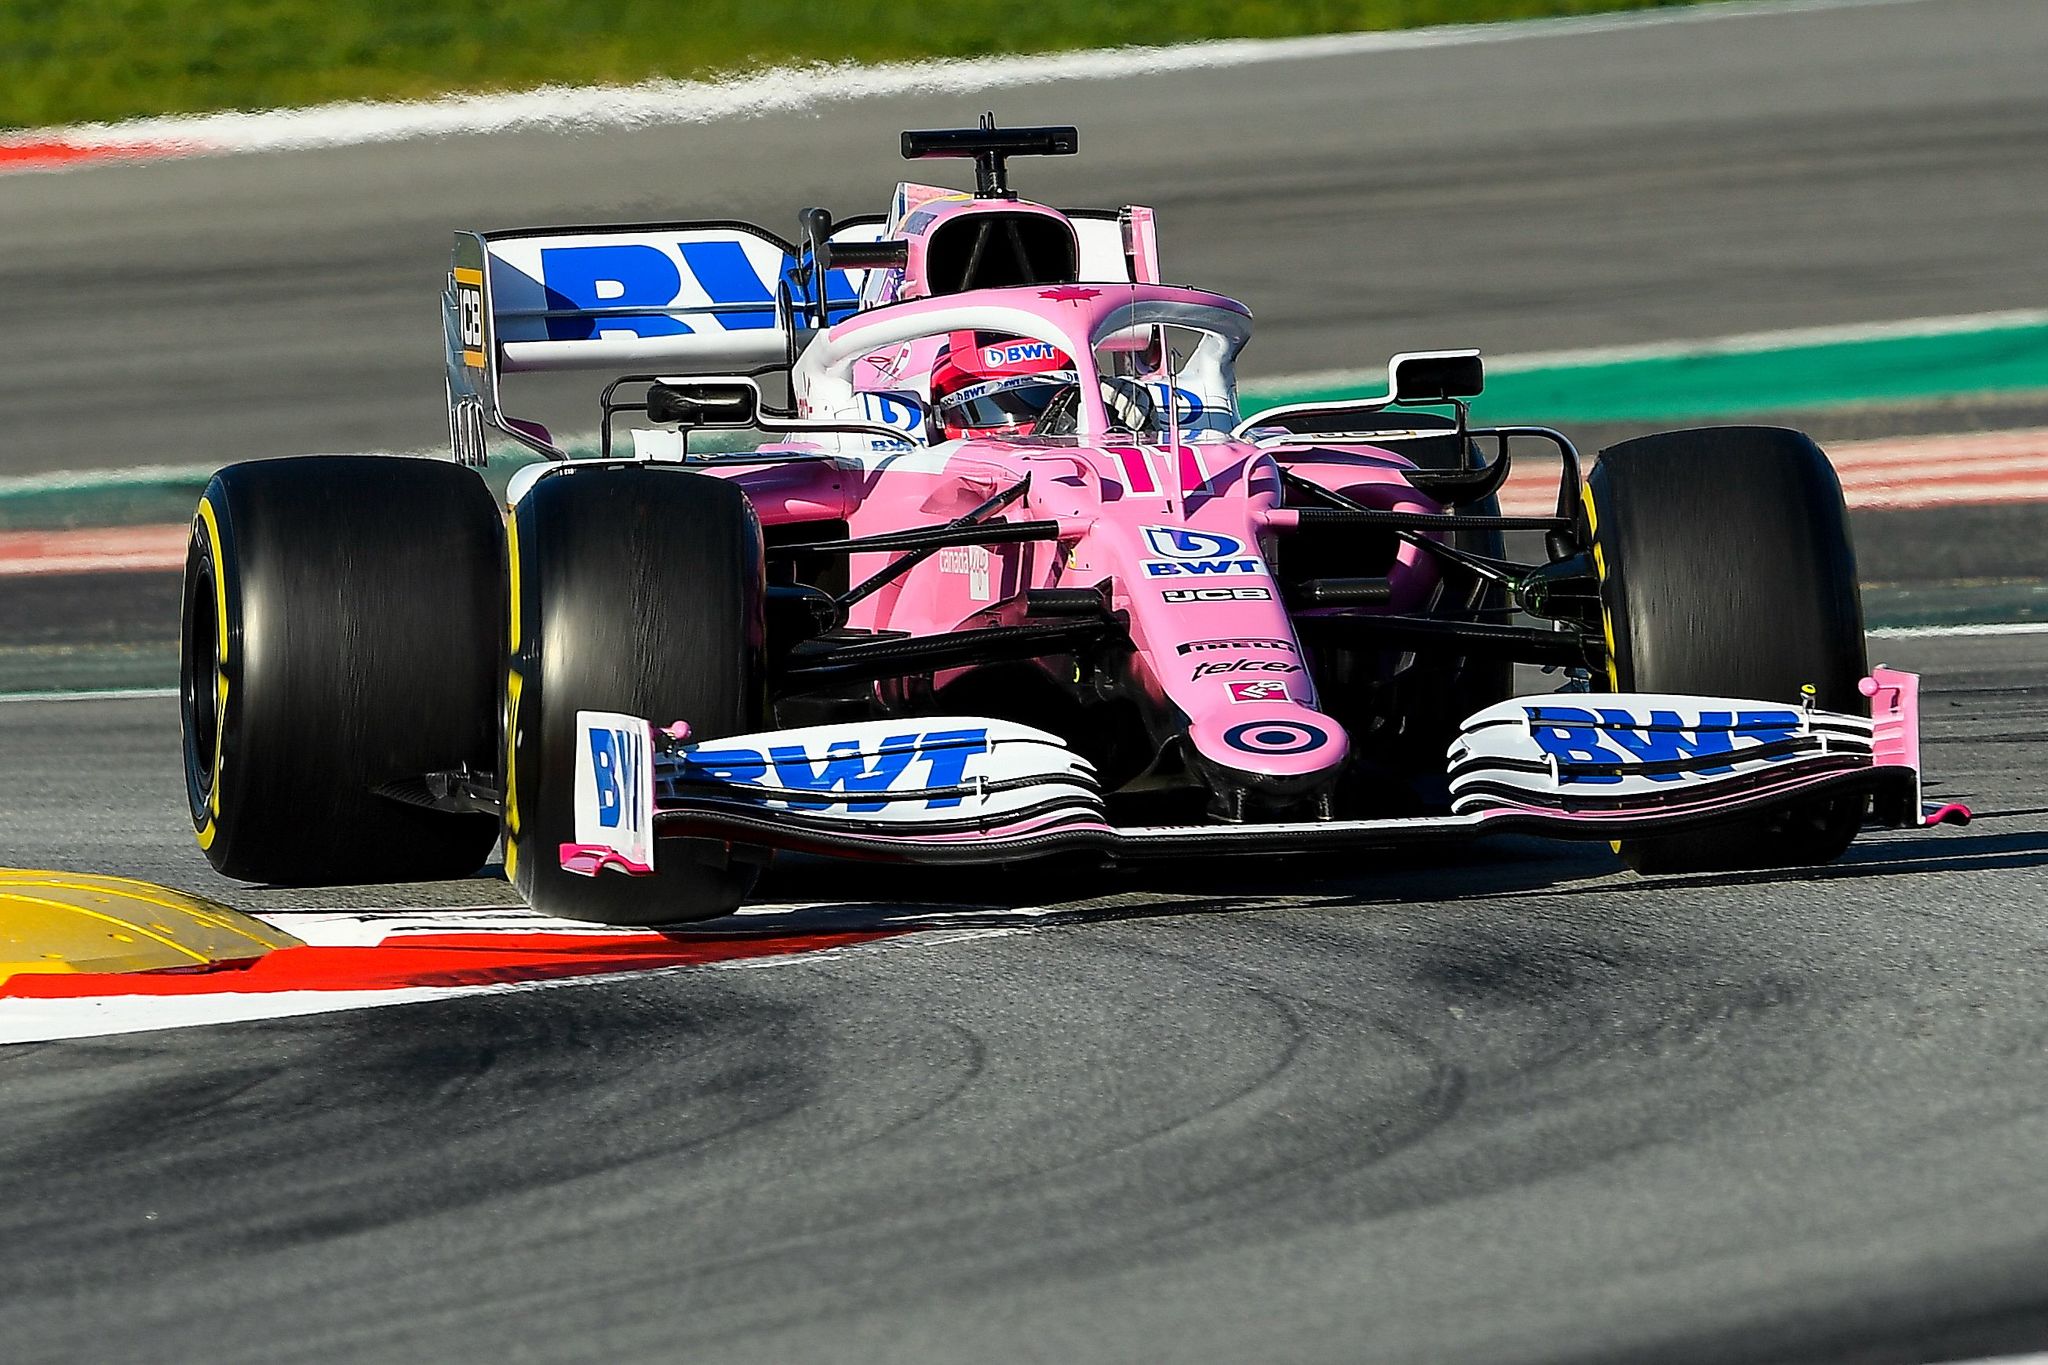  lt;HIT gt;Racing lt;/HIT gt; lt;HIT gt;Point lt;/HIT gt;s Mexican driver Sergio Perez takes part in the tests for the new Formula One Grand Prix season at the Circuit de Catalunya in Montmelo in the outskirts of Barcelona on February 28, 2020. (Photo by Josep LAGO / AFP)